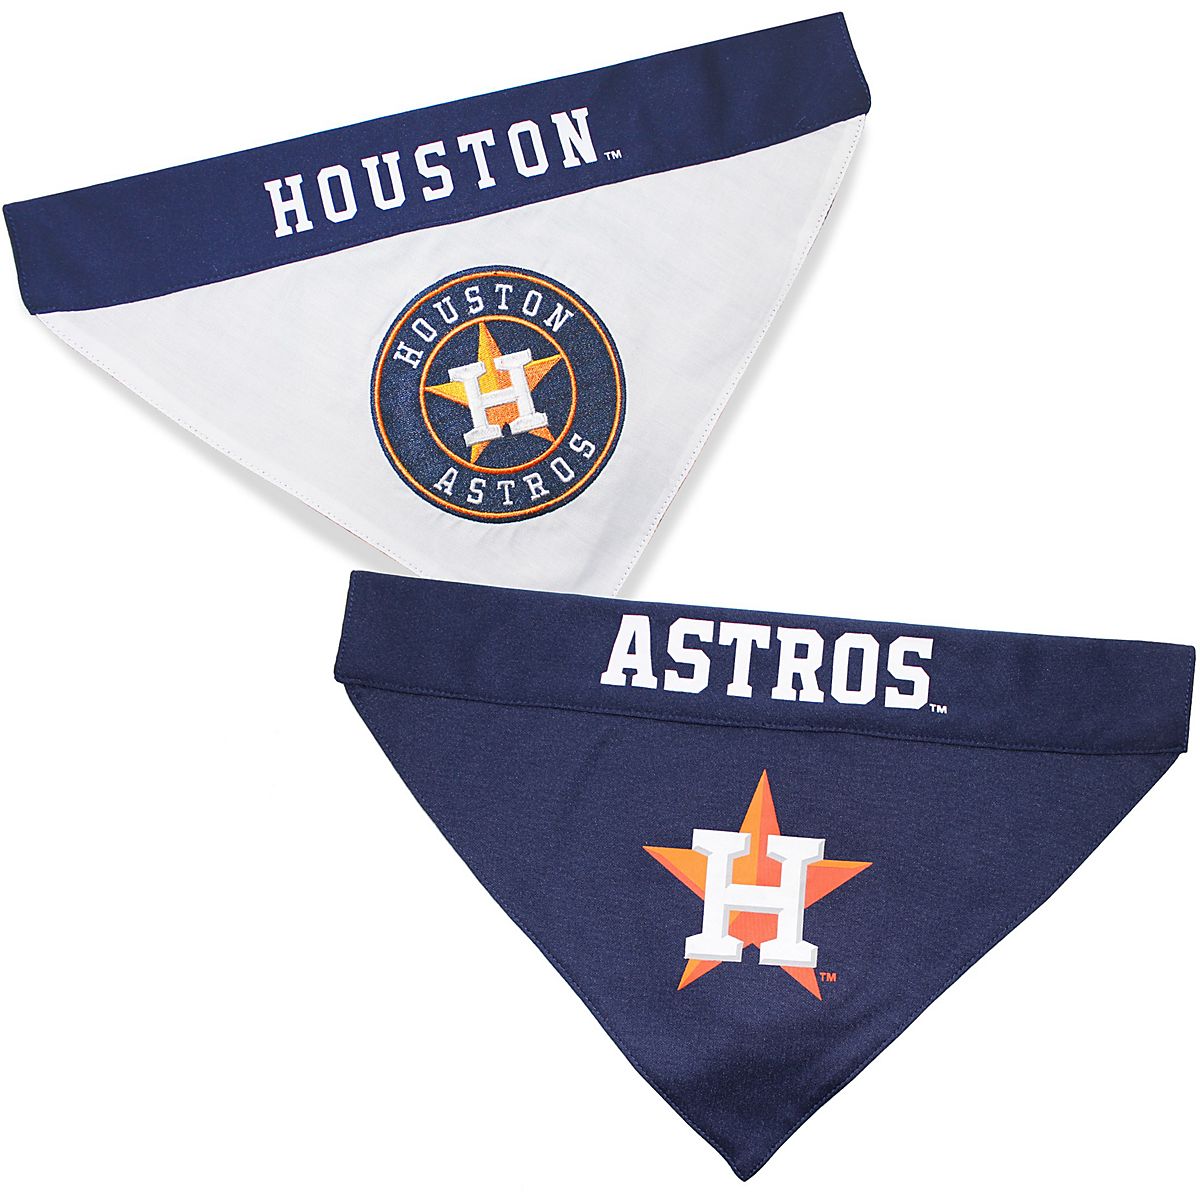 Pets First MLB Houston Astros Cats and Dogs Durable Pet Leash, Large